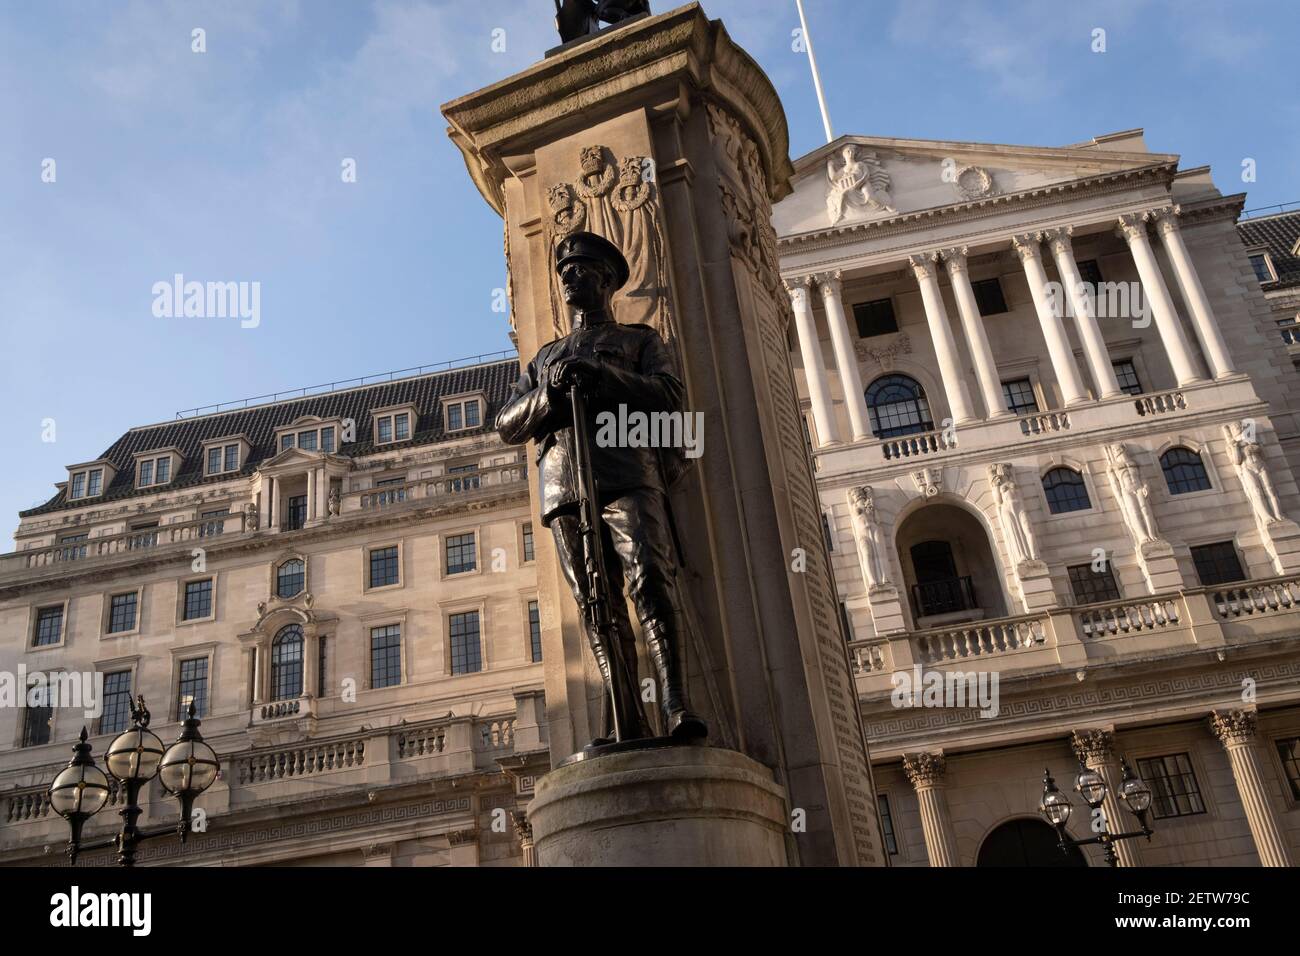 The figure of a fallen soldier of the First World War and an exterior of the Bank of England in the City of London, on 1st March 2021, in London, England. Stock Photo